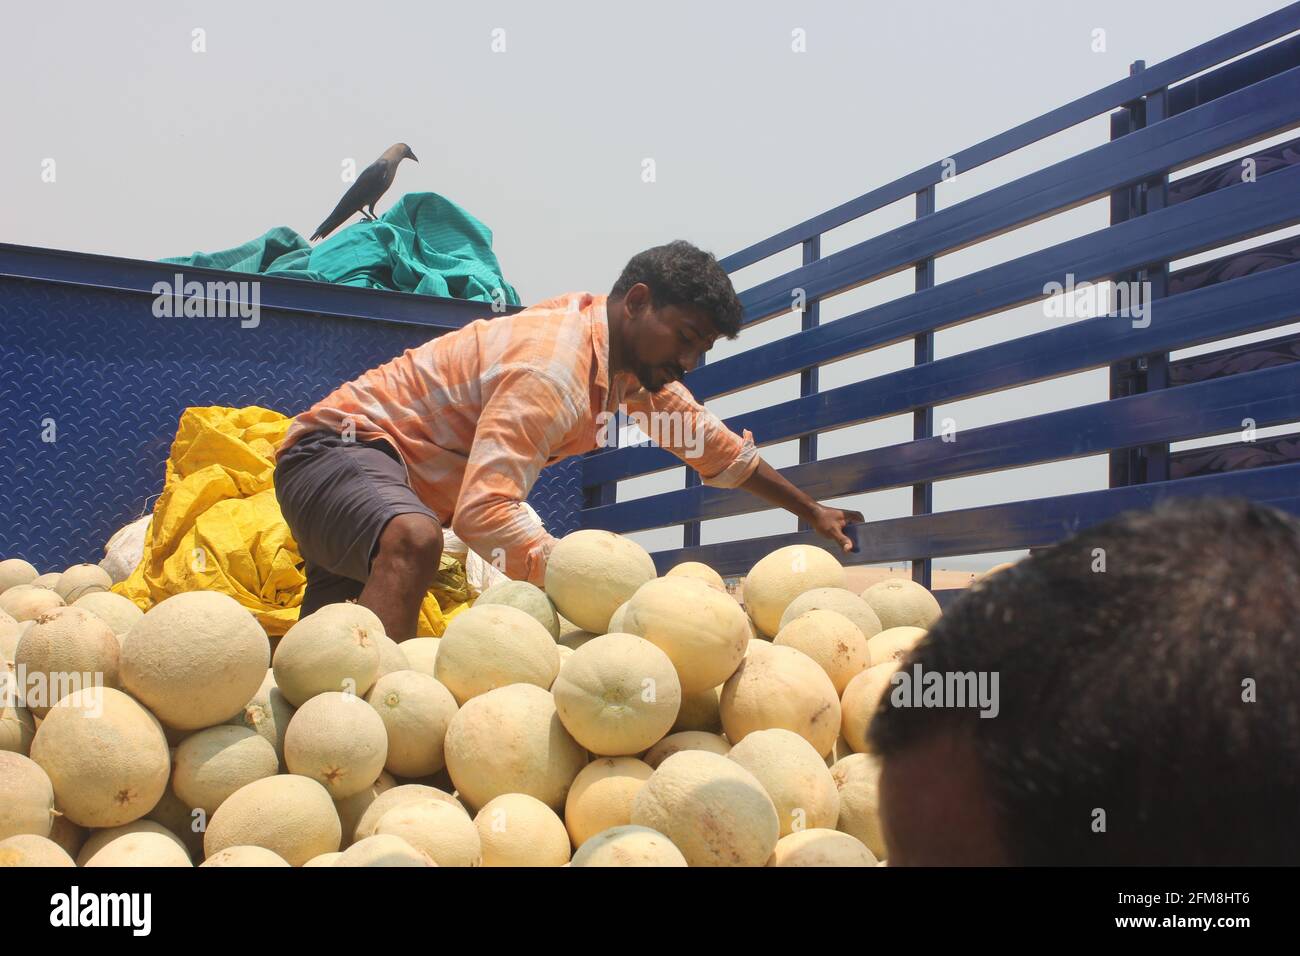 Vendors selling fruit and vegetables on the street in chennai,tamil nadu india Stock Photo